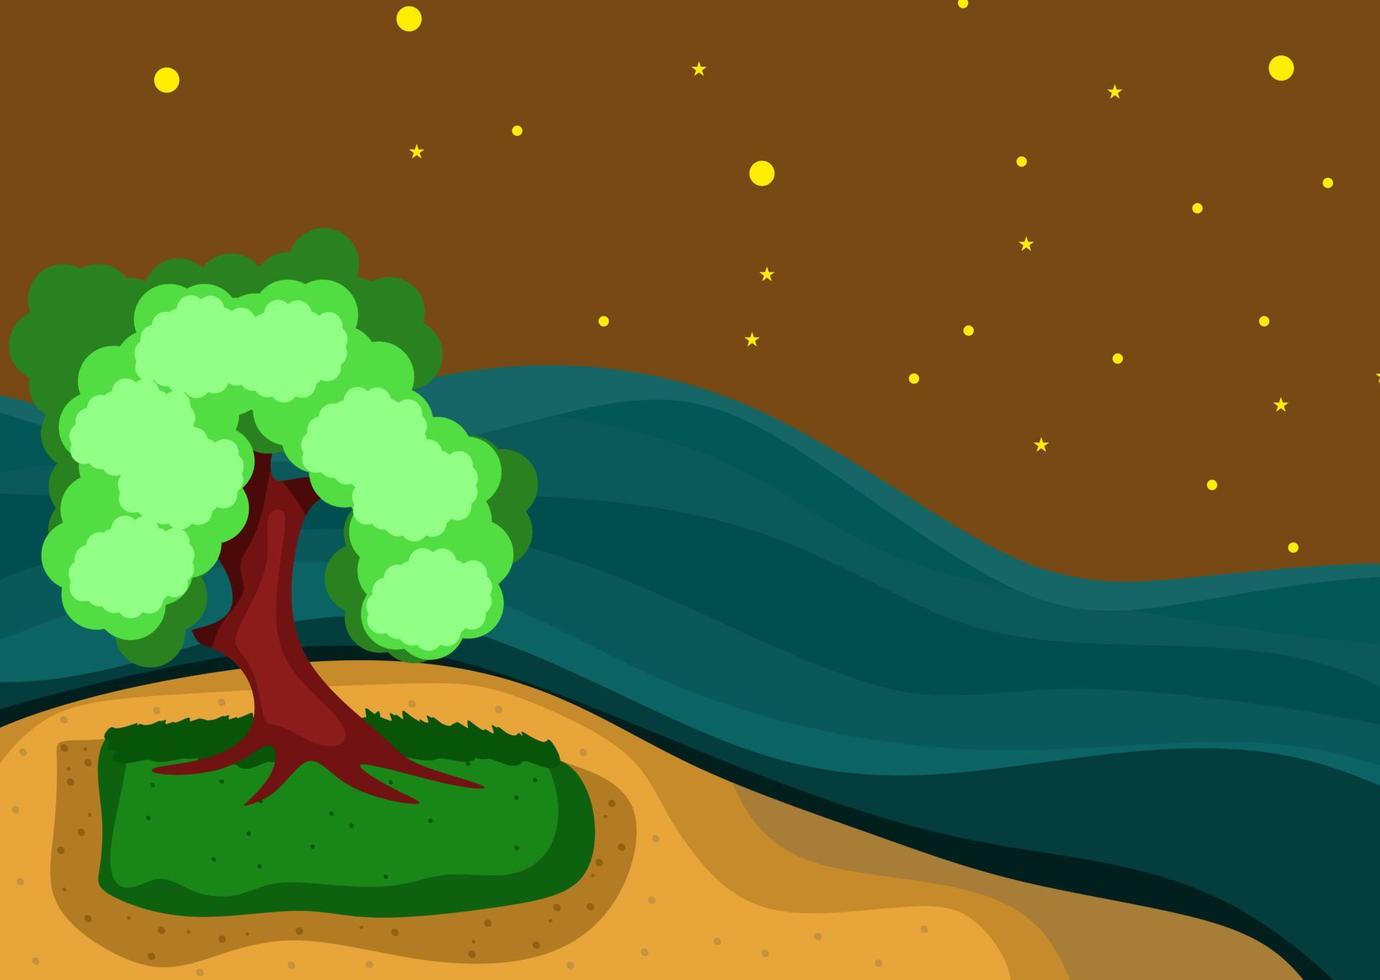 background tree and sea in flat design illustration vector